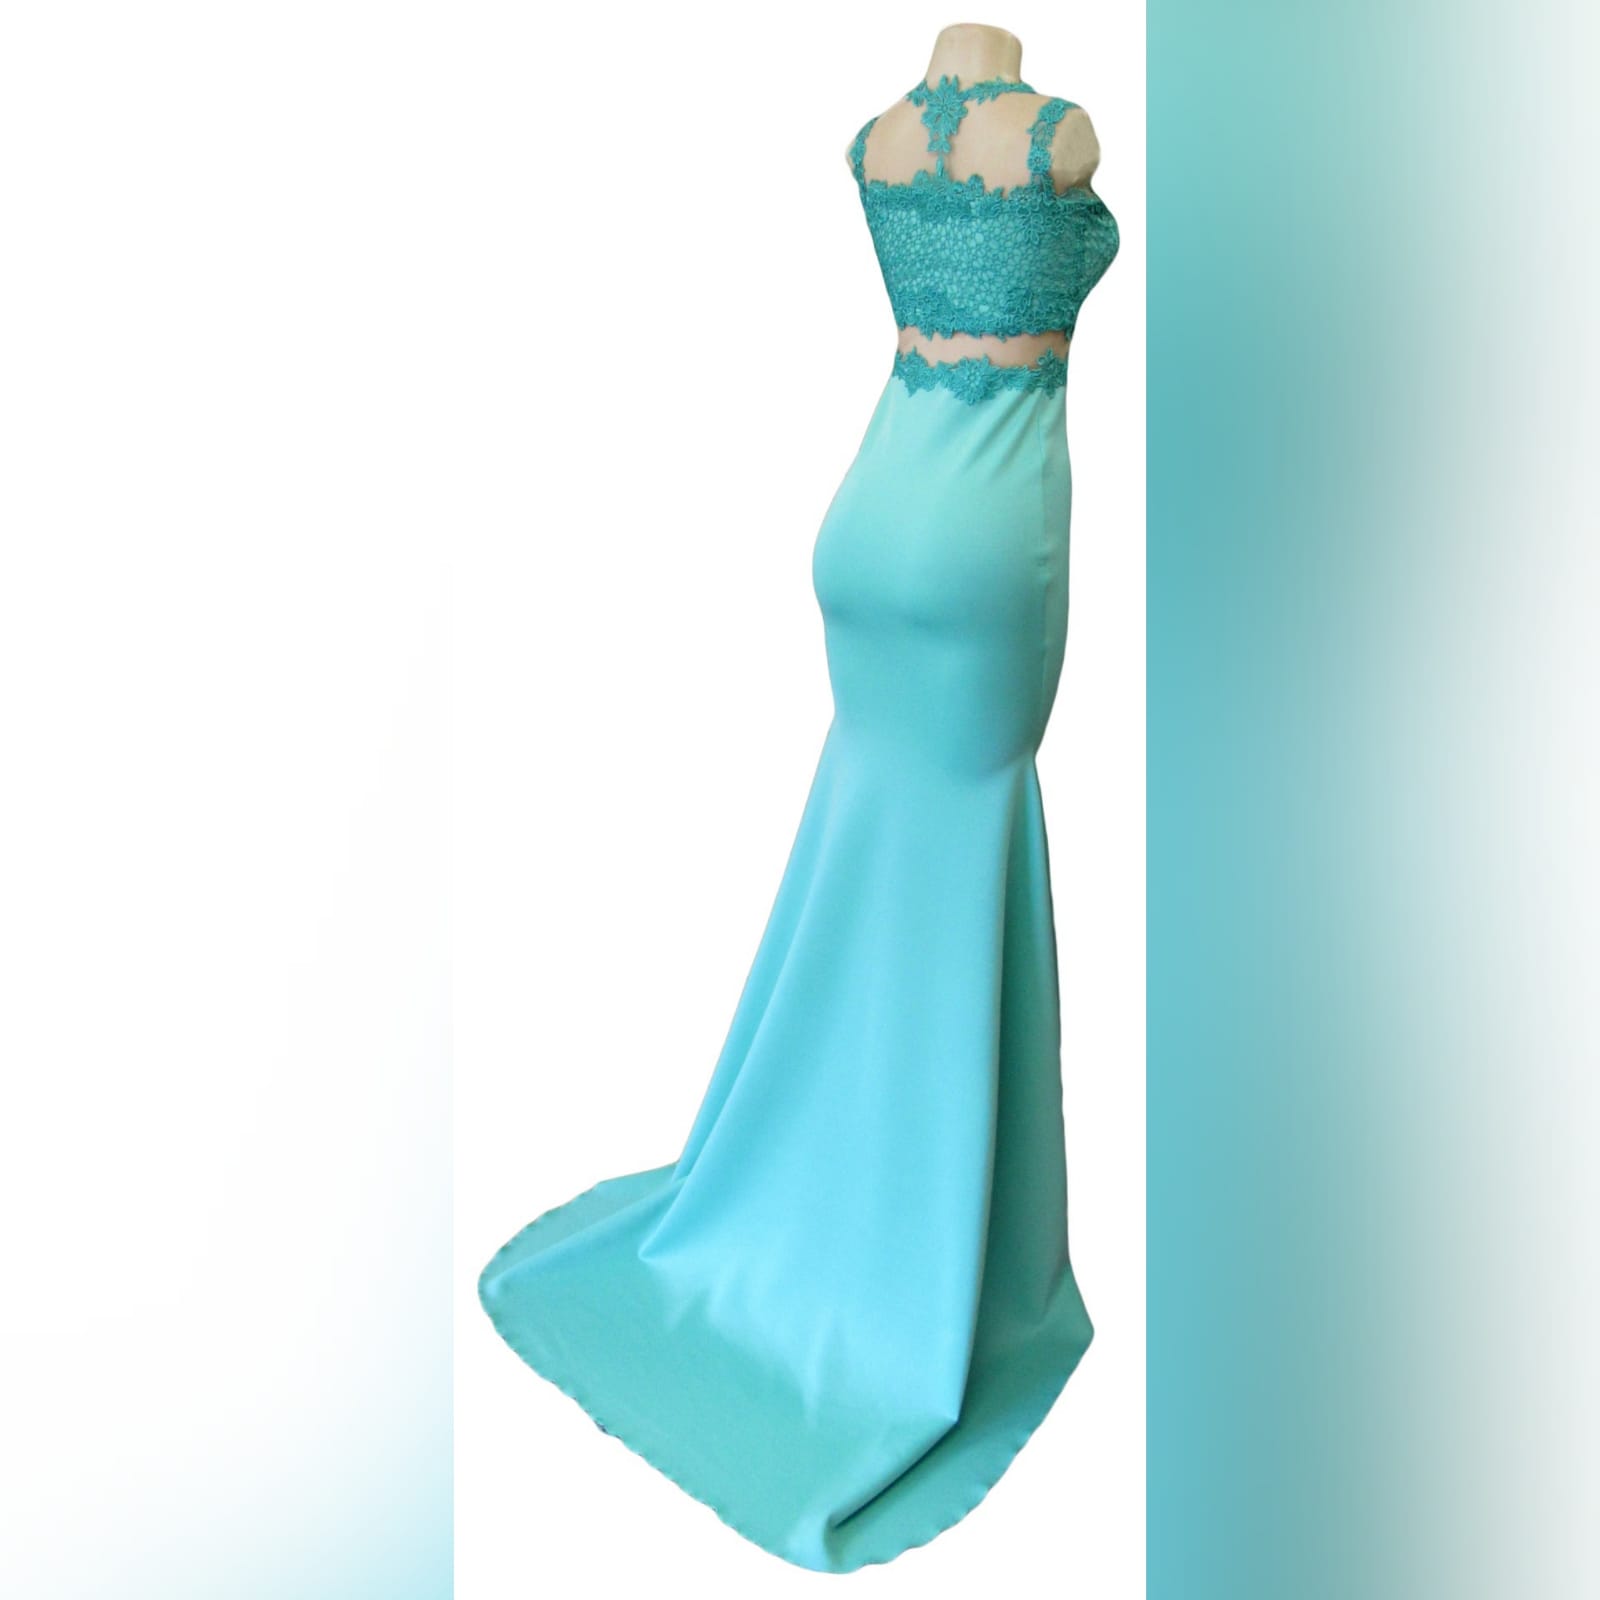 Illusion 2 piece mint green soft mermaid prom dress 3 illusion 2 piece mint green soft mermaid prom dress with a lace bodice and illusion lace neckline